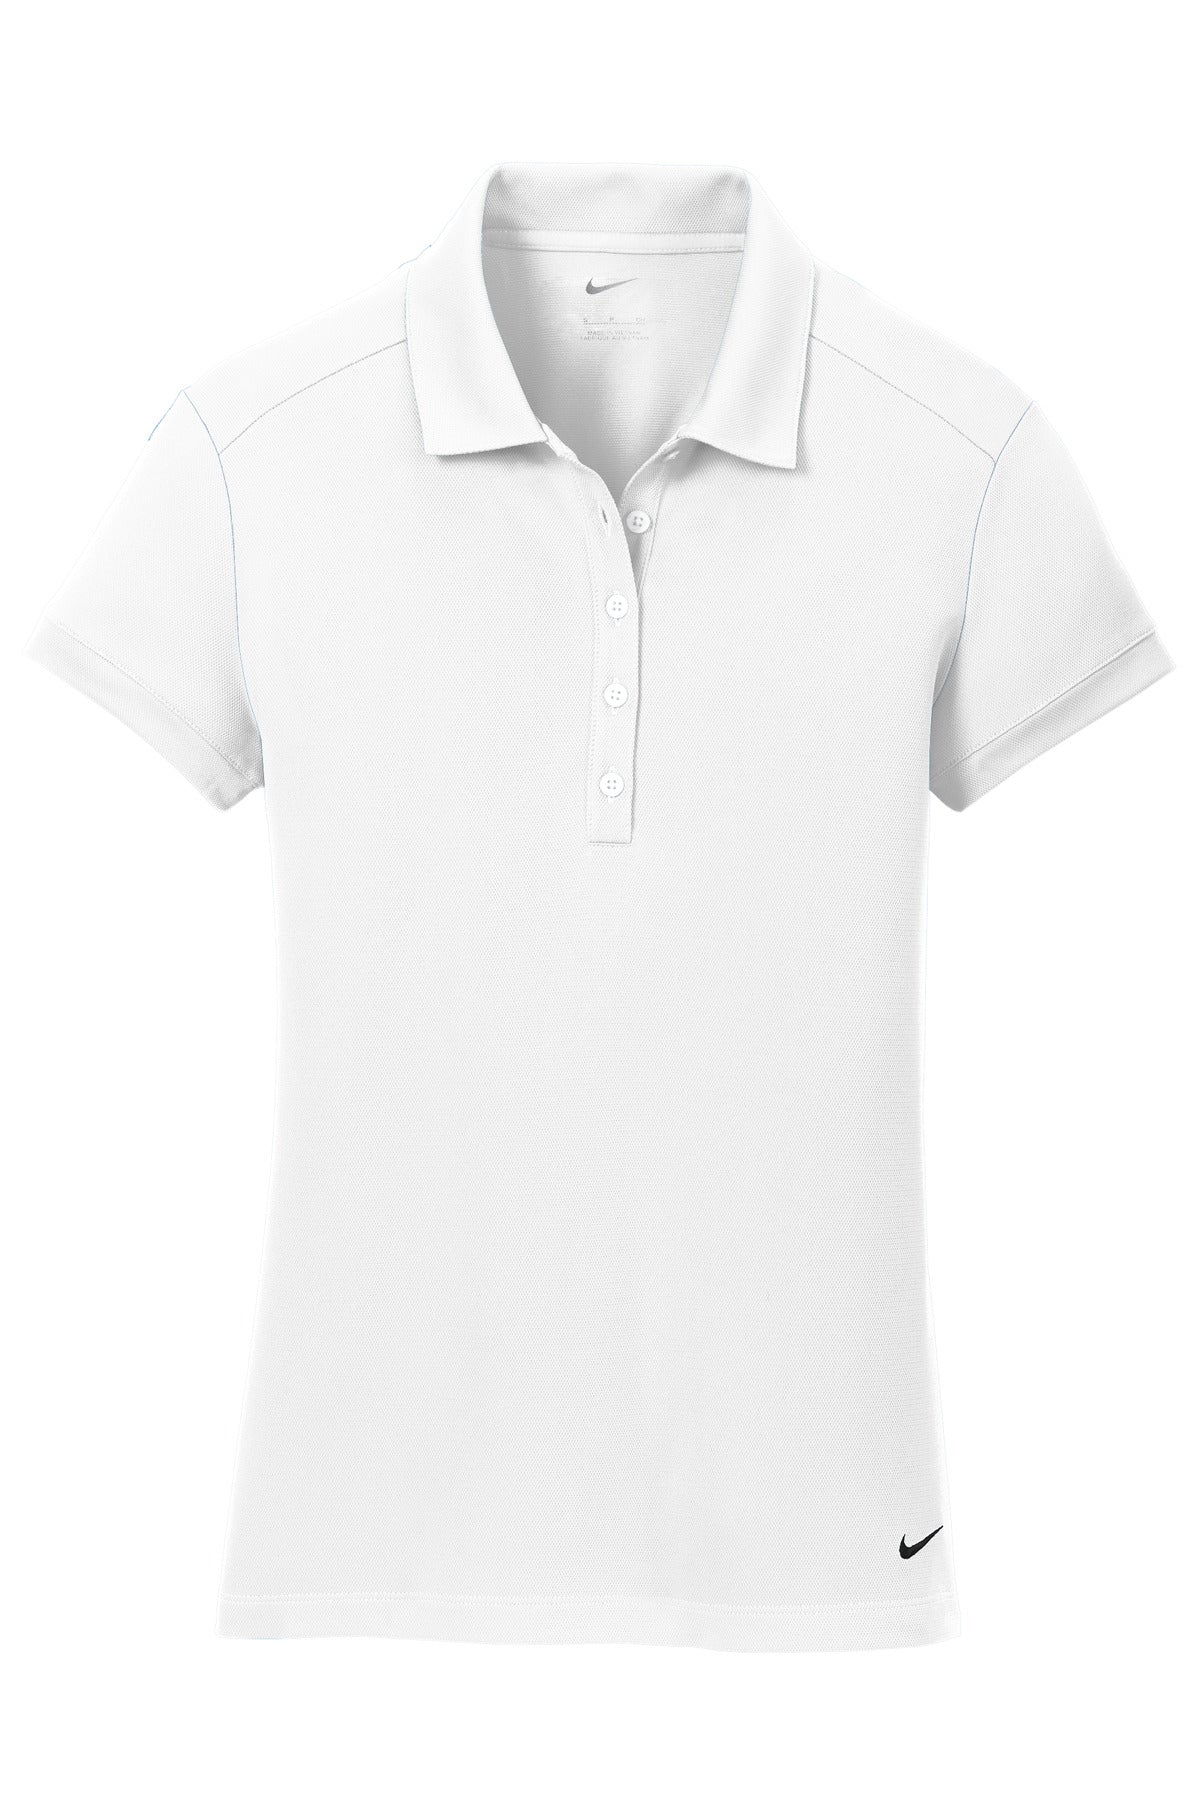 Nike Ladies Dri-FIT Solid Icon Pique Modern Fit Polo. 746100